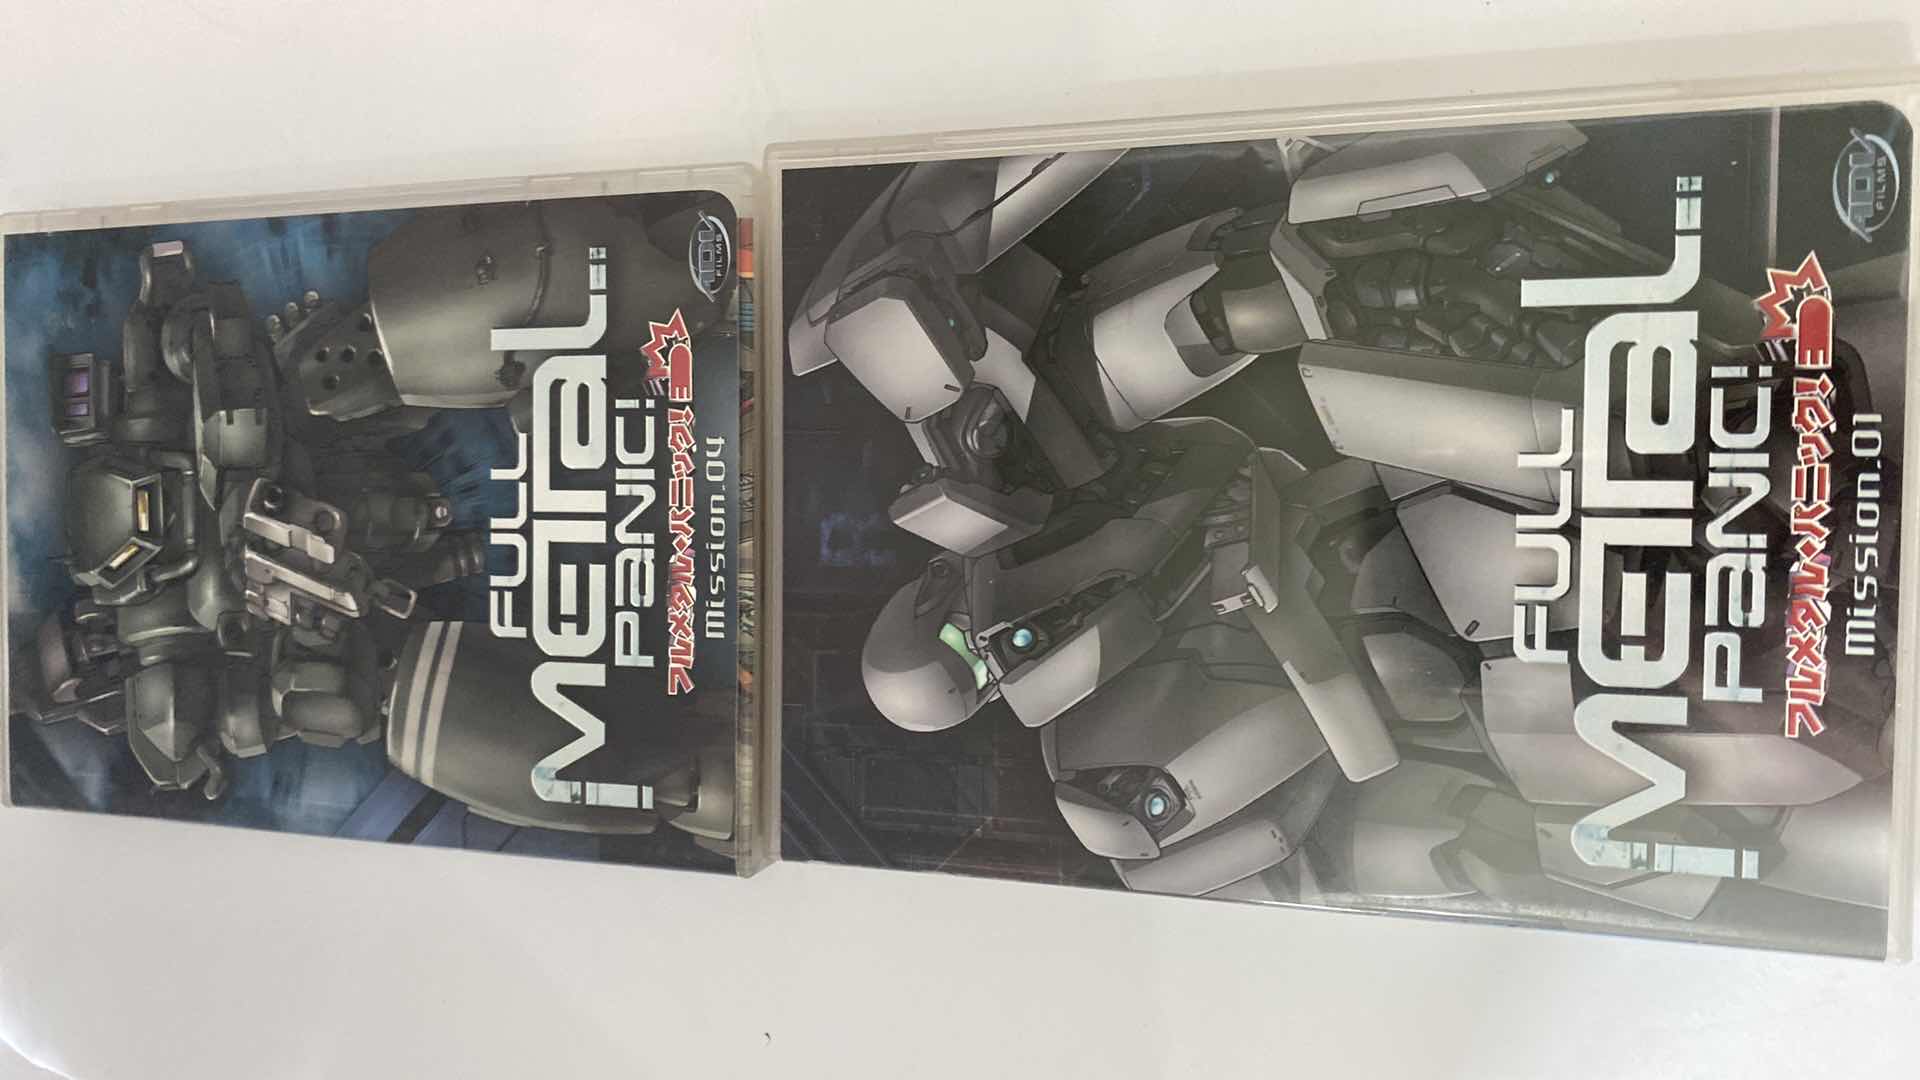 Photo 2 of 7 DVDS - SERIES FULL METAL PANIC MISSION 1-7